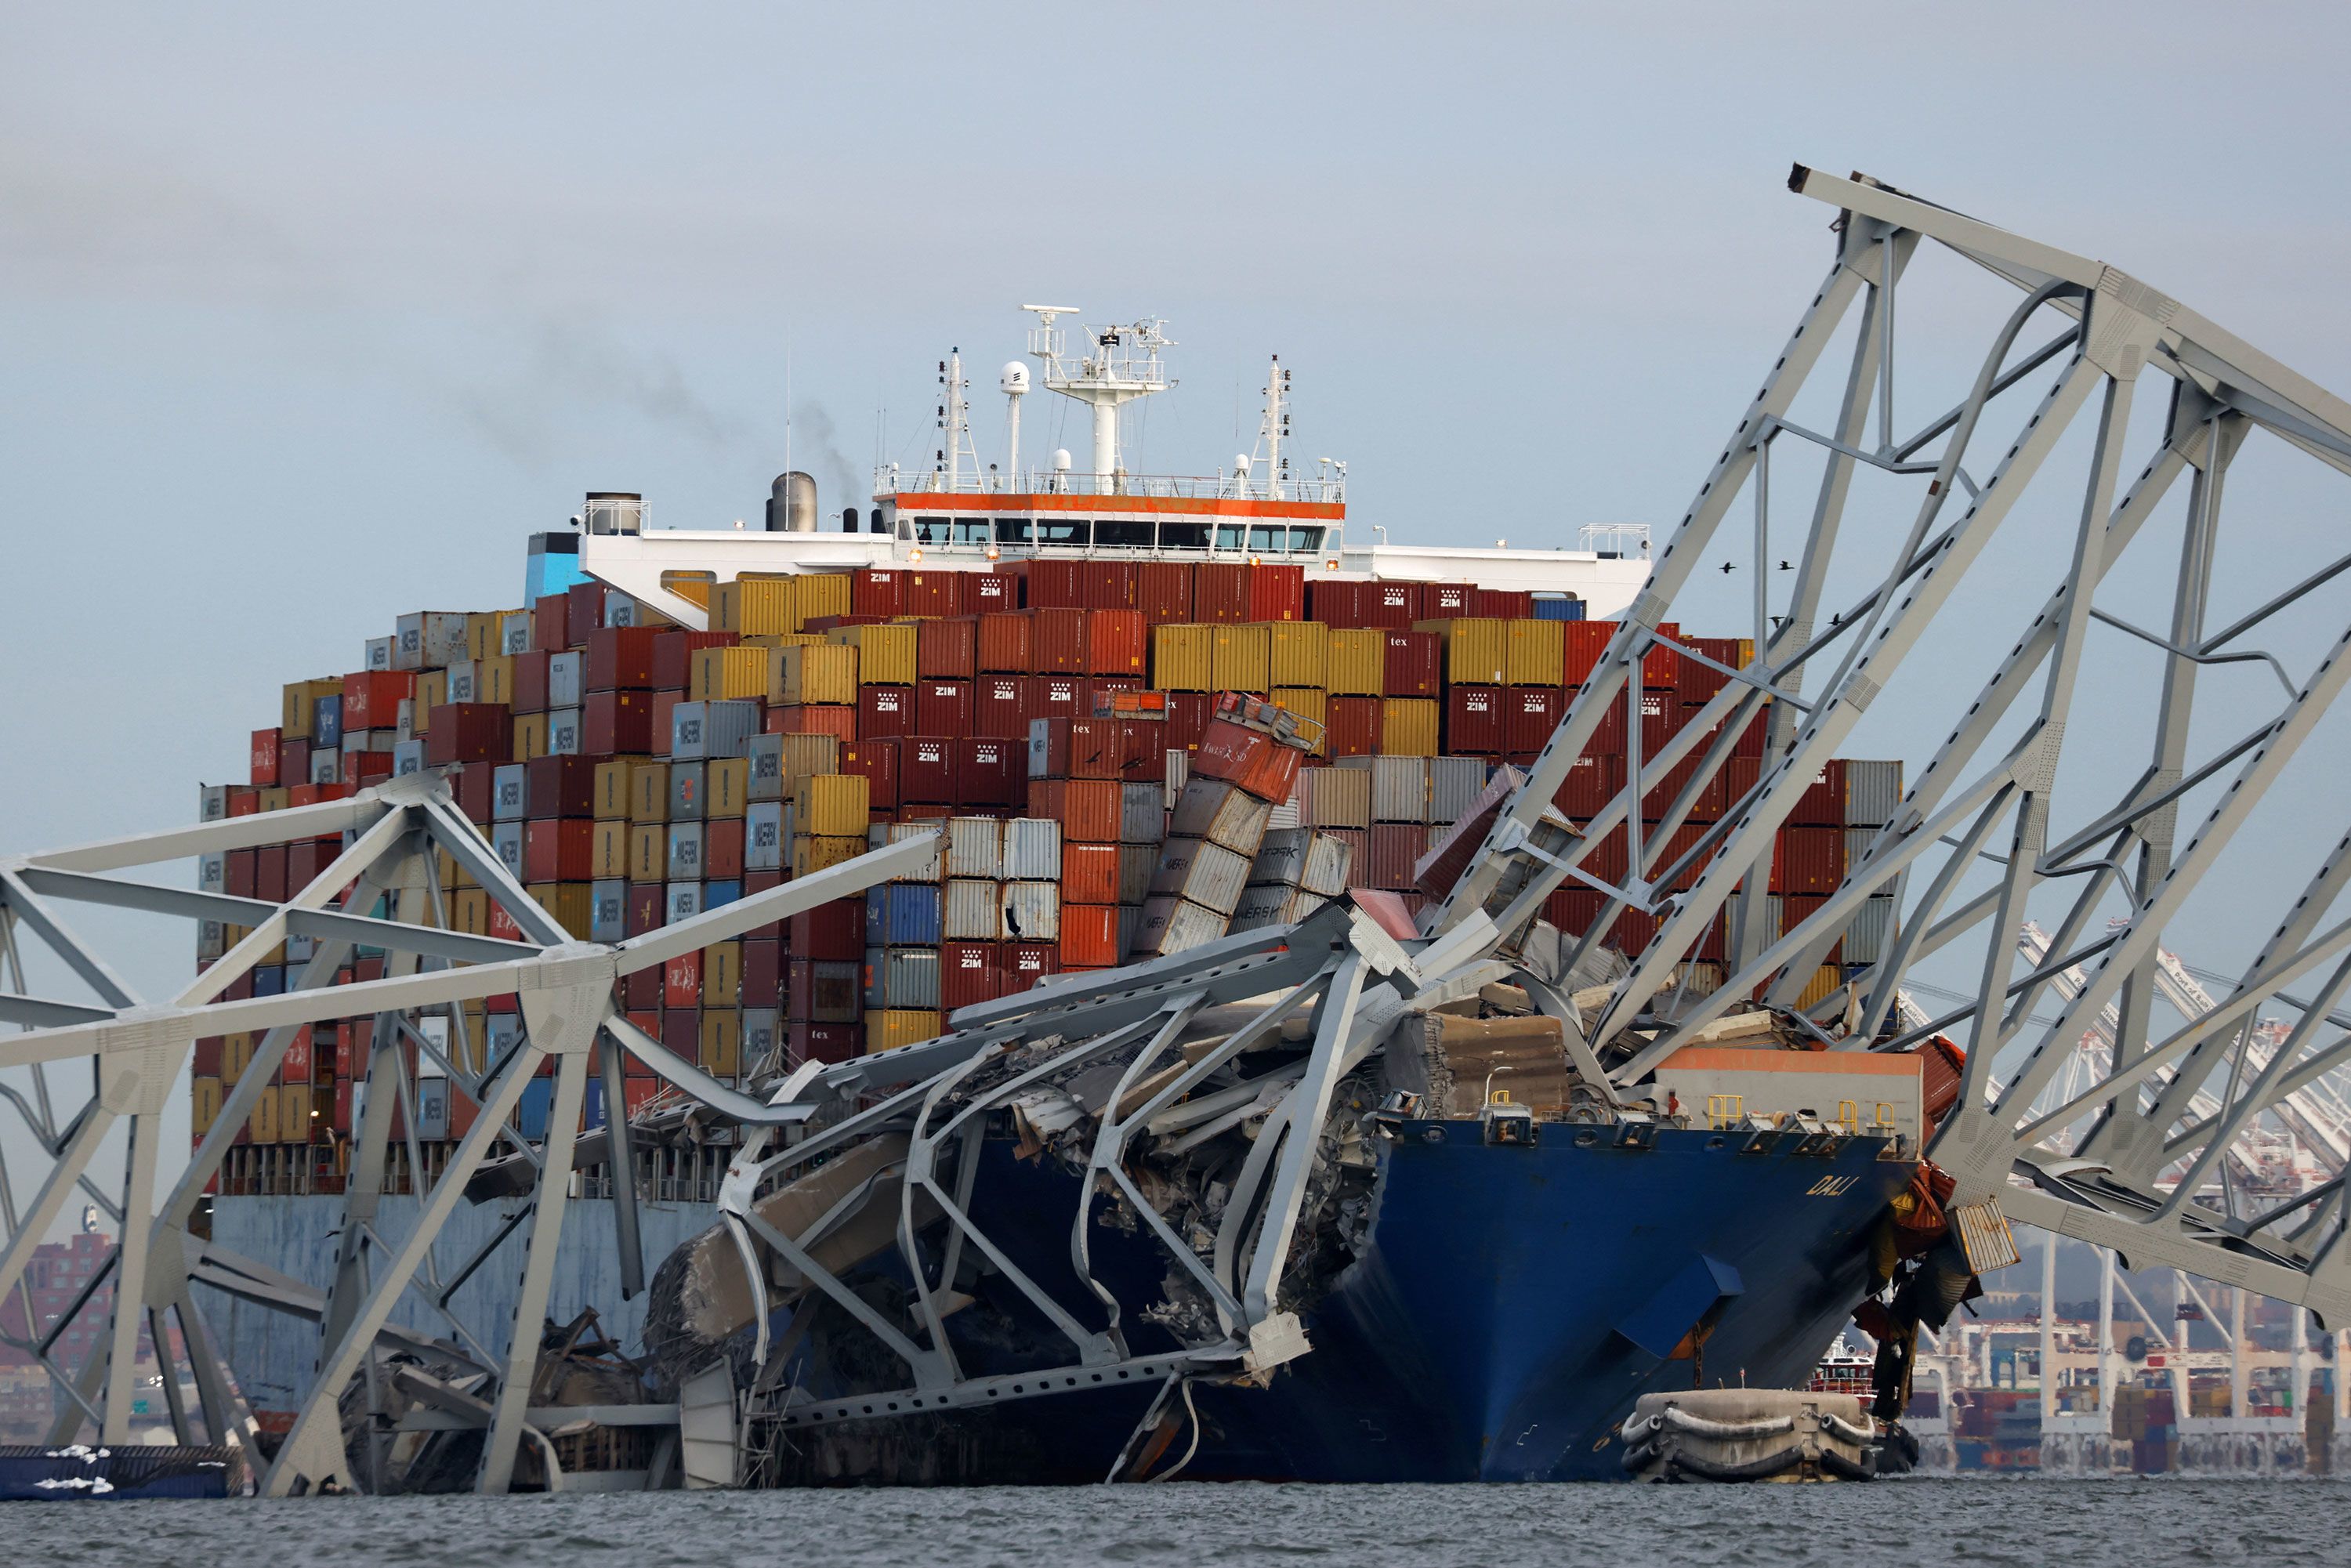 Part of the Francis Scott Key Bridge is mangled after the Dali container ship crashed into it in Baltimore on Tuesday, March 26.